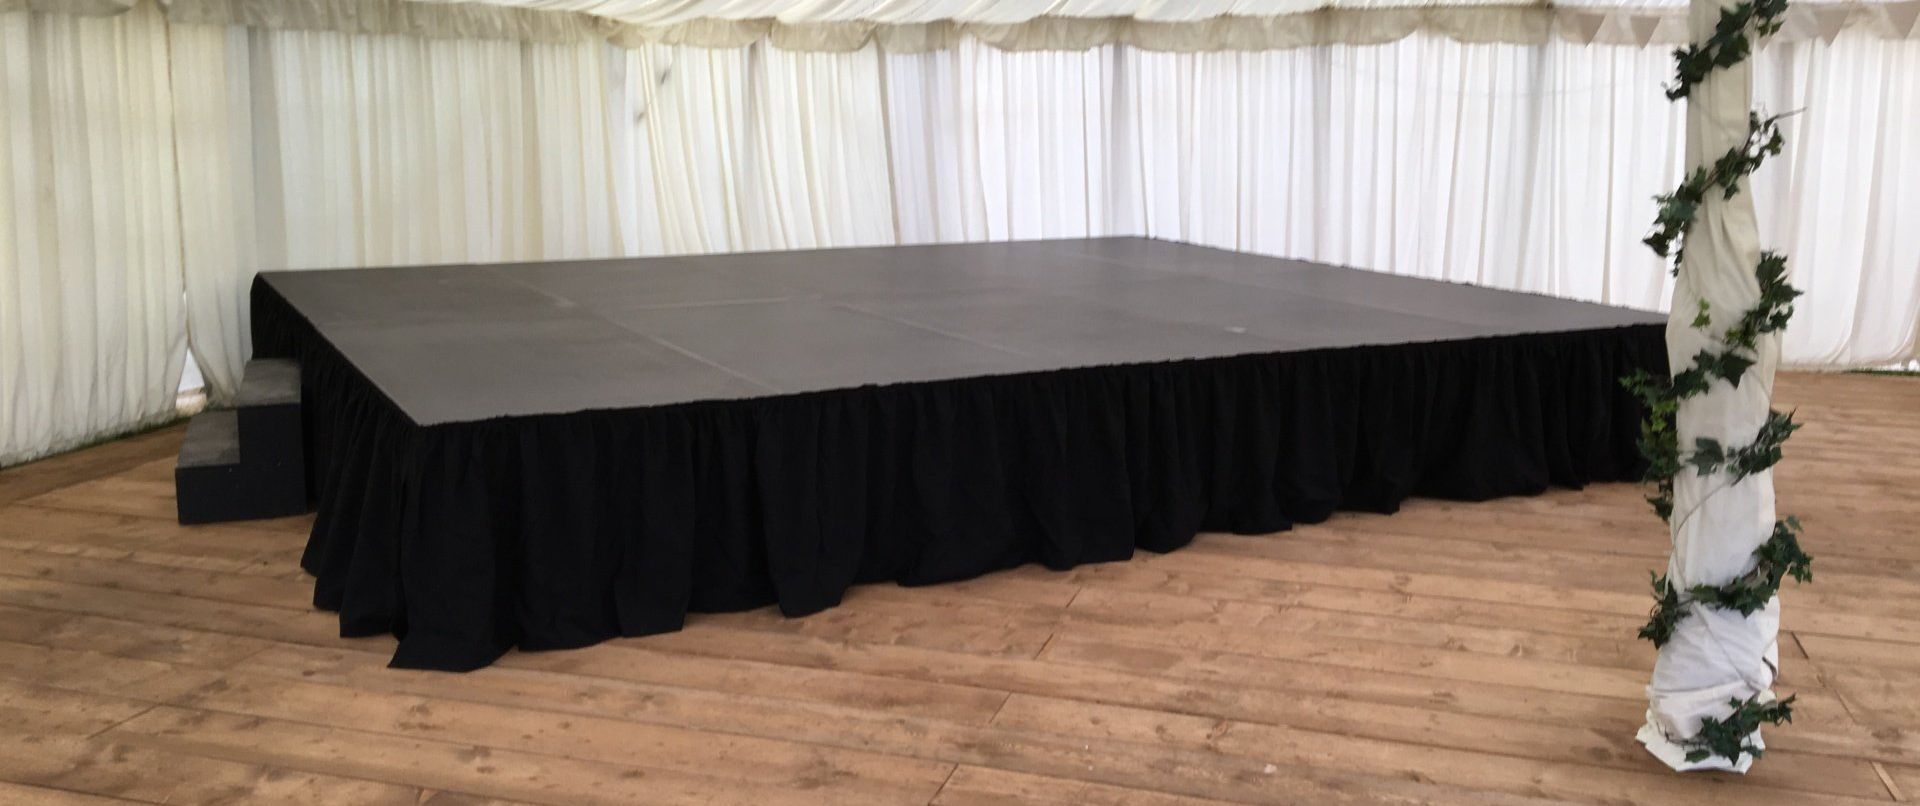 A black low level stage set up in a marquee for a wedding, with a black skirt around the edge and steps to one side. The floor is wooden and white drapes hang from the walls.